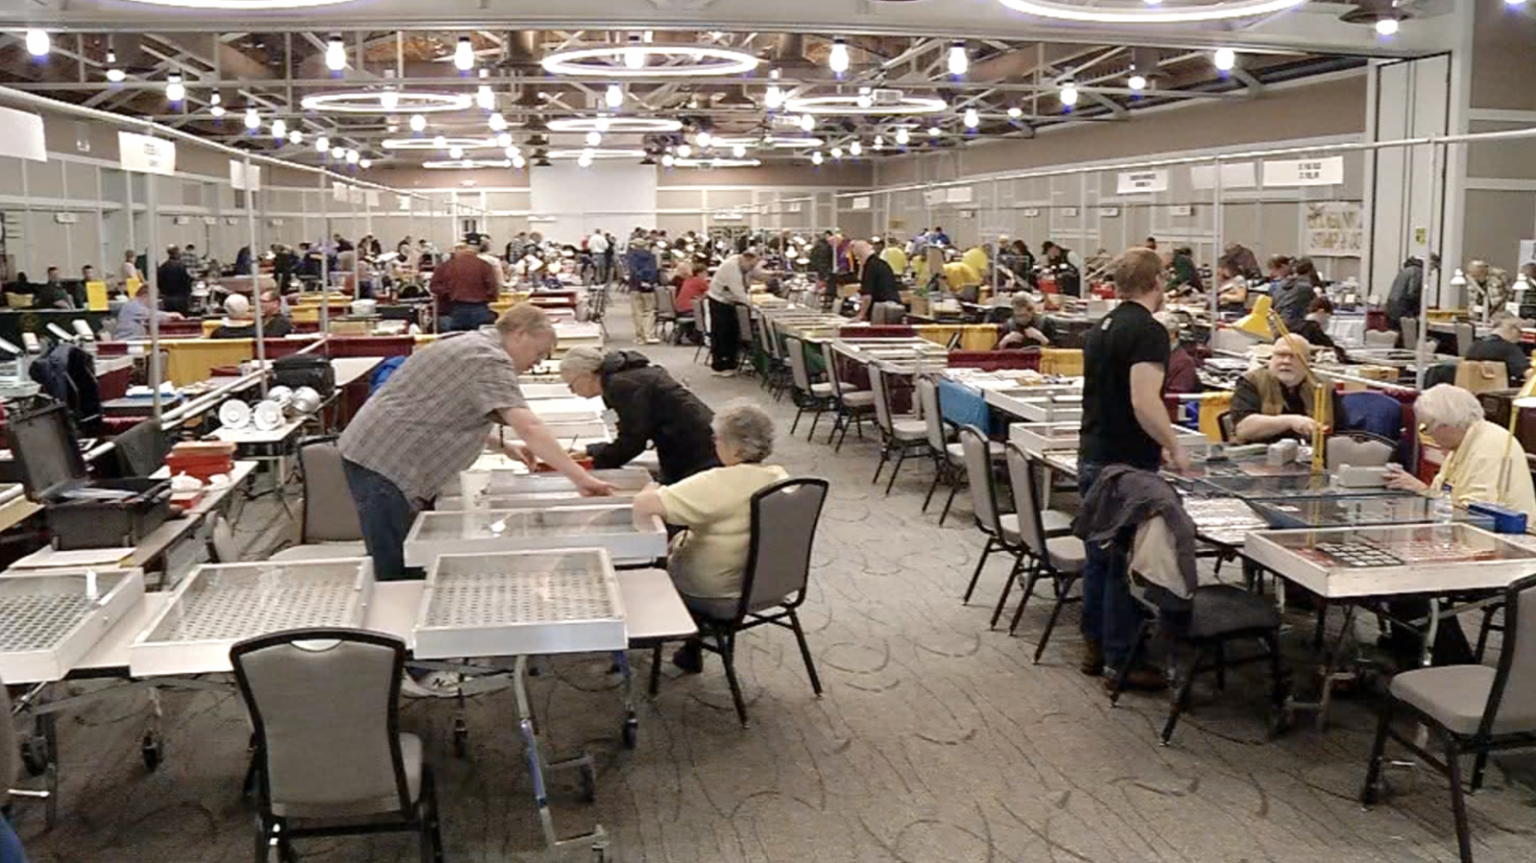 Minnesota’s Largest Coin Show Returns to Brooklyn Center This Weekend